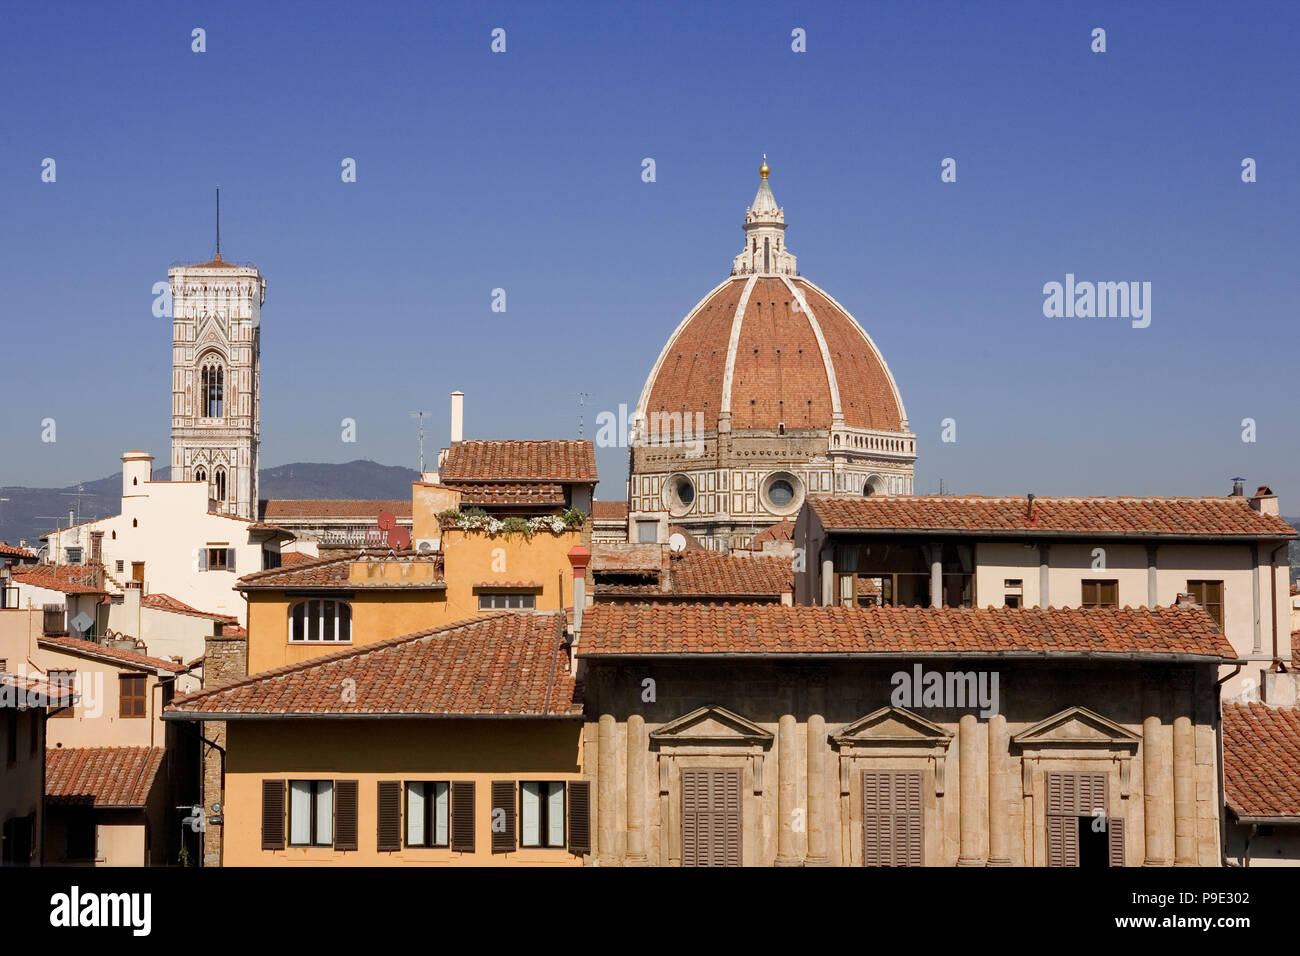 Rooftops from the Palazzo Vecchio, with the Duomo dome and Campanile, Florence, Tuscany, Italy Stock Photo